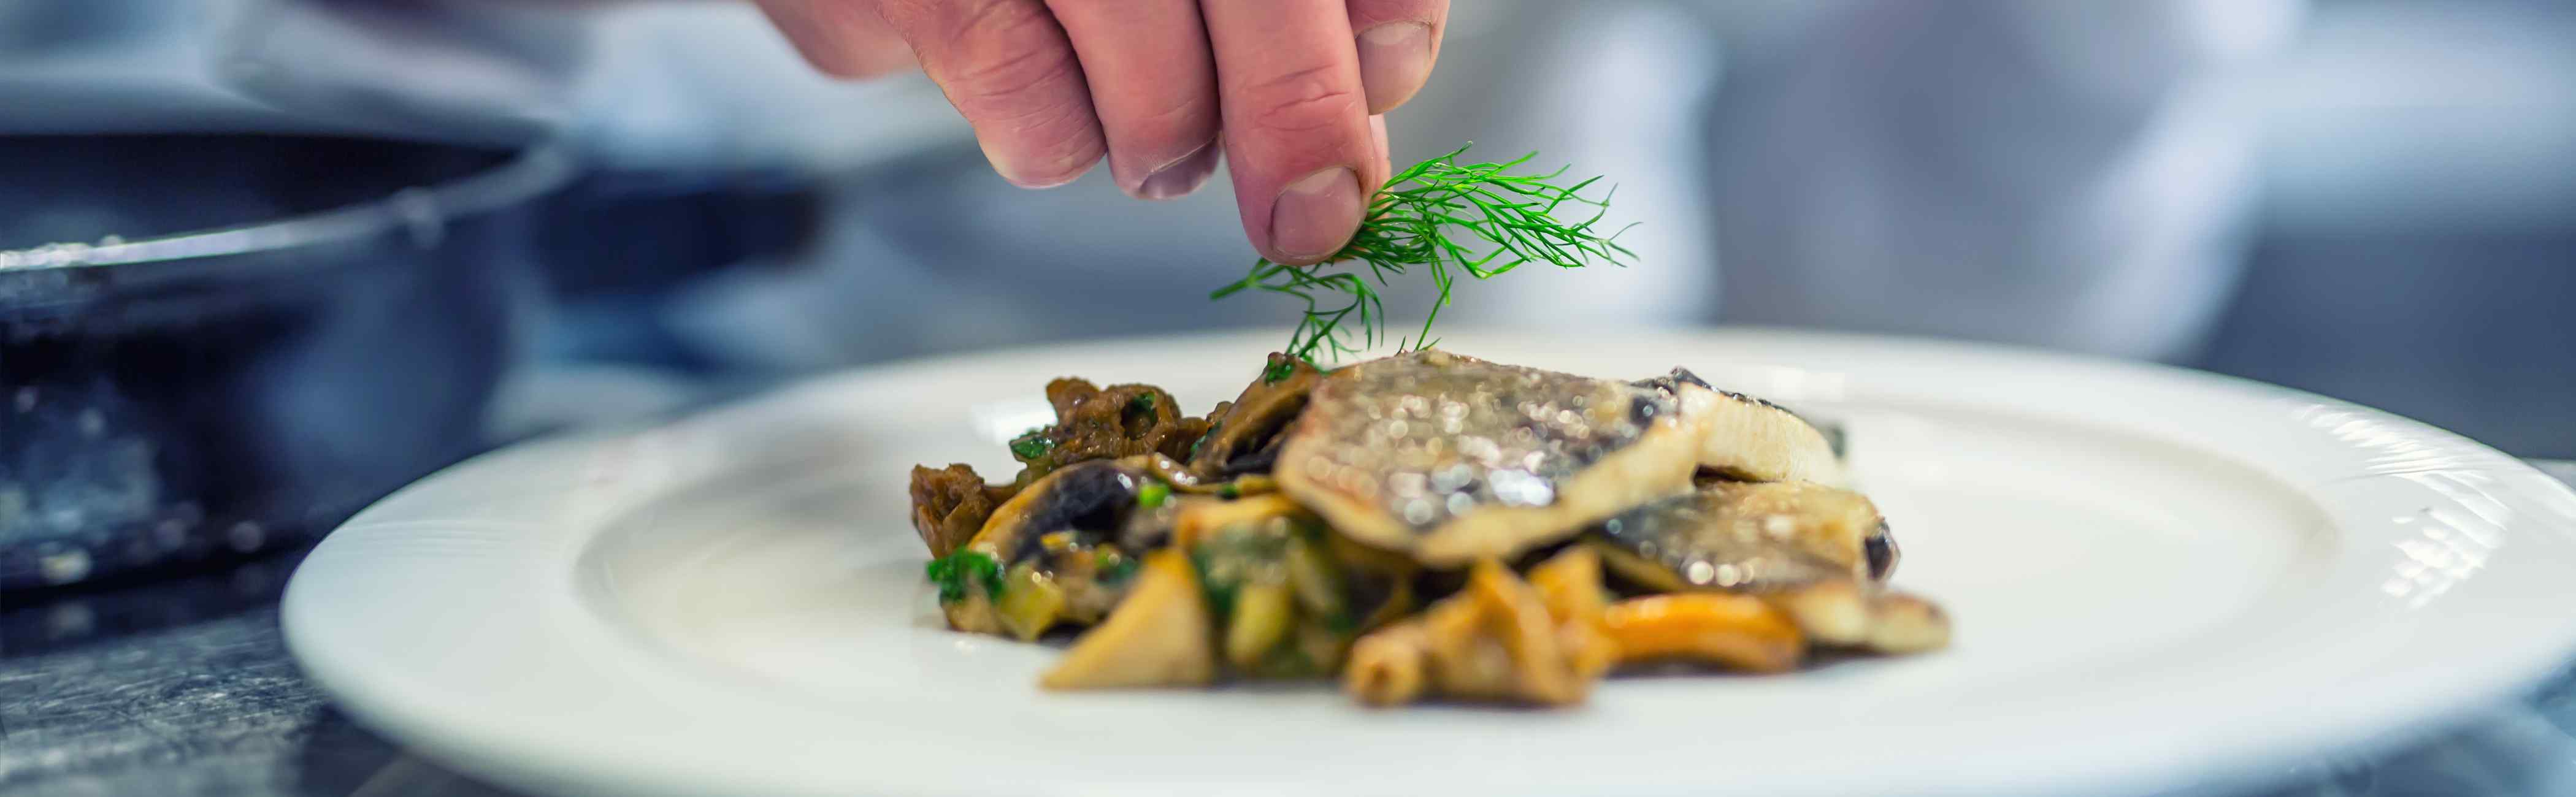 A hand sprinkling garnish onto a plated fish dinner.